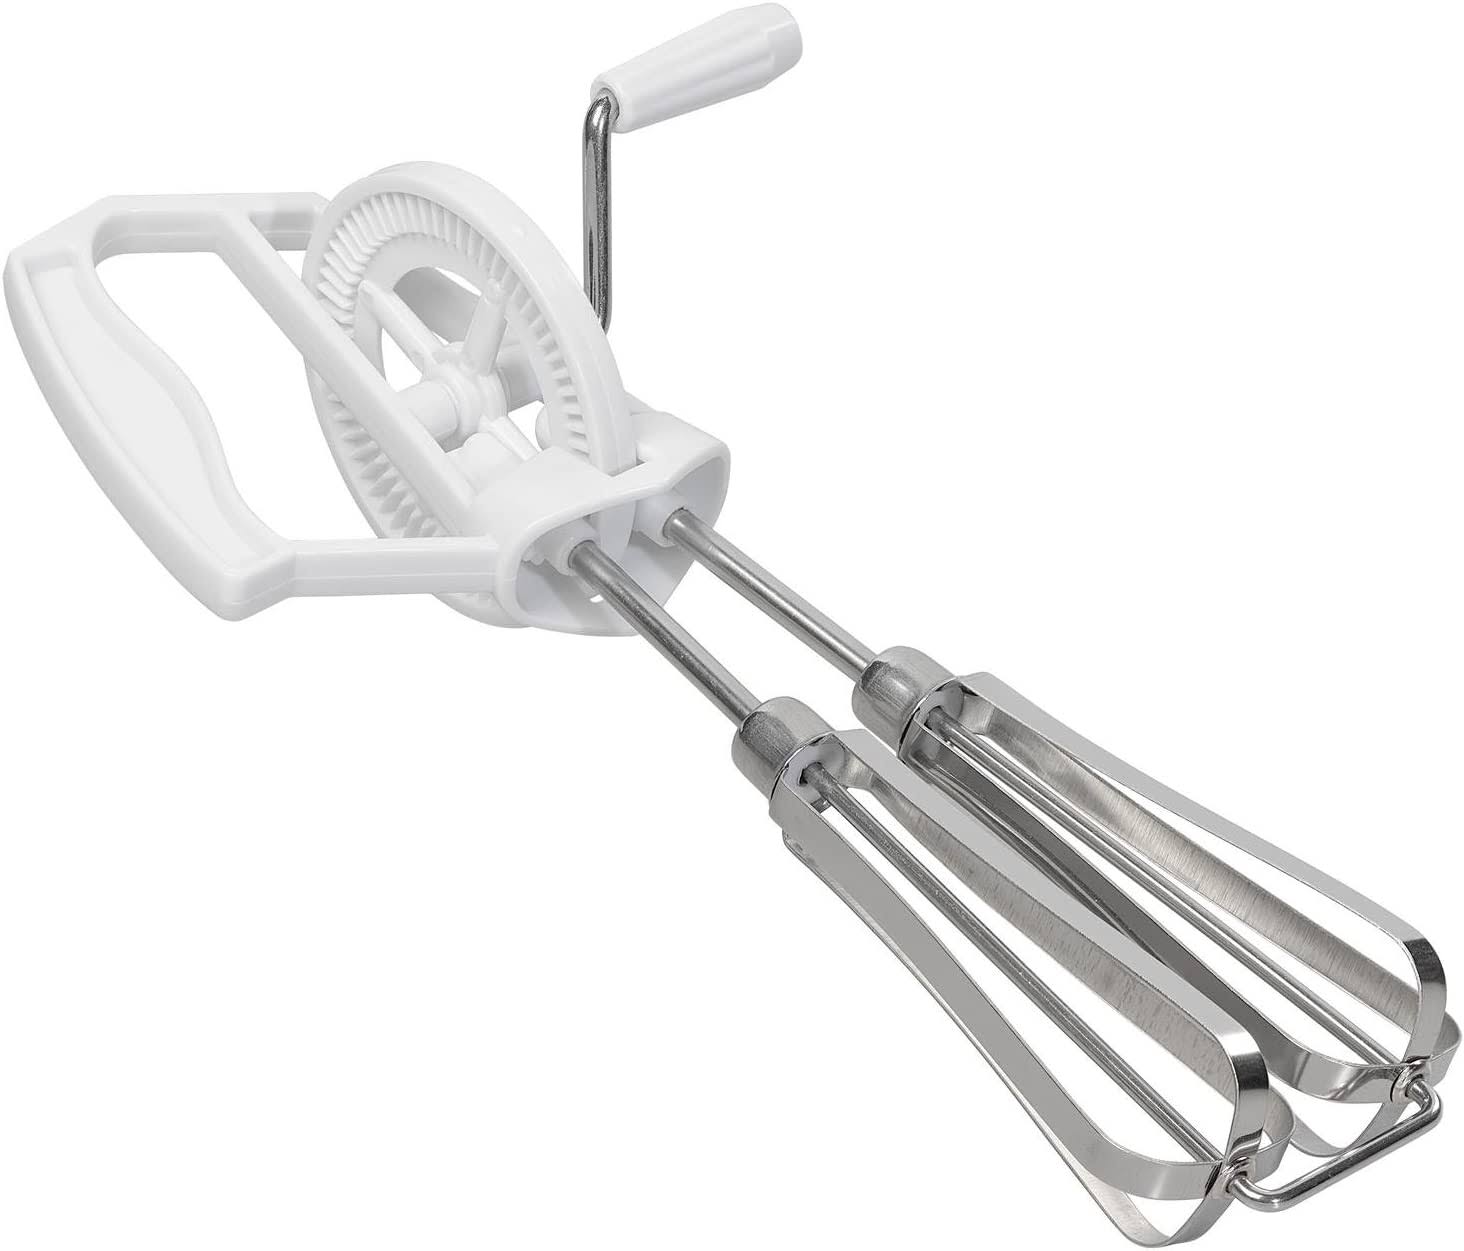 Chef Aid Rotary Egg Whisk